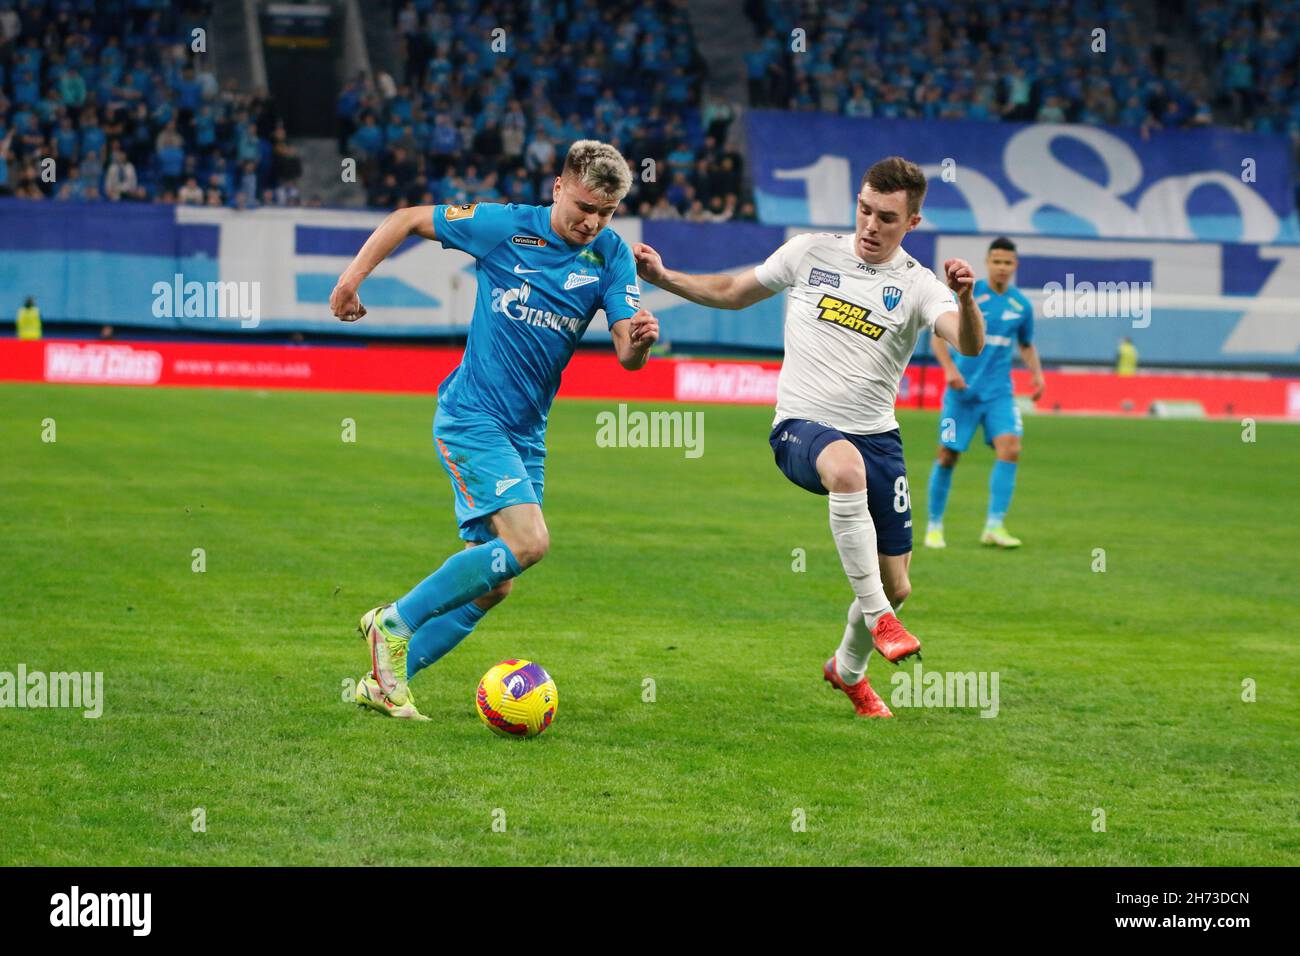 Saint Petersburg, Russia. 19th Nov, 2021. Andrey Mostovoy (L) of Zenit and Ilya Berkovsky (R) of Nizhny Novgorod are seen in action during the Russian Premier League football match between Zenit Saint Petersburg and Nizhny Novgorod at Gazprom Arena.Final score; Zenit 5:1 Nizhny Novgorod. (Photo by Maksim Konstantinov/SOPA Image/Sipa USA) Credit: Sipa USA/Alamy Live News Stock Photo